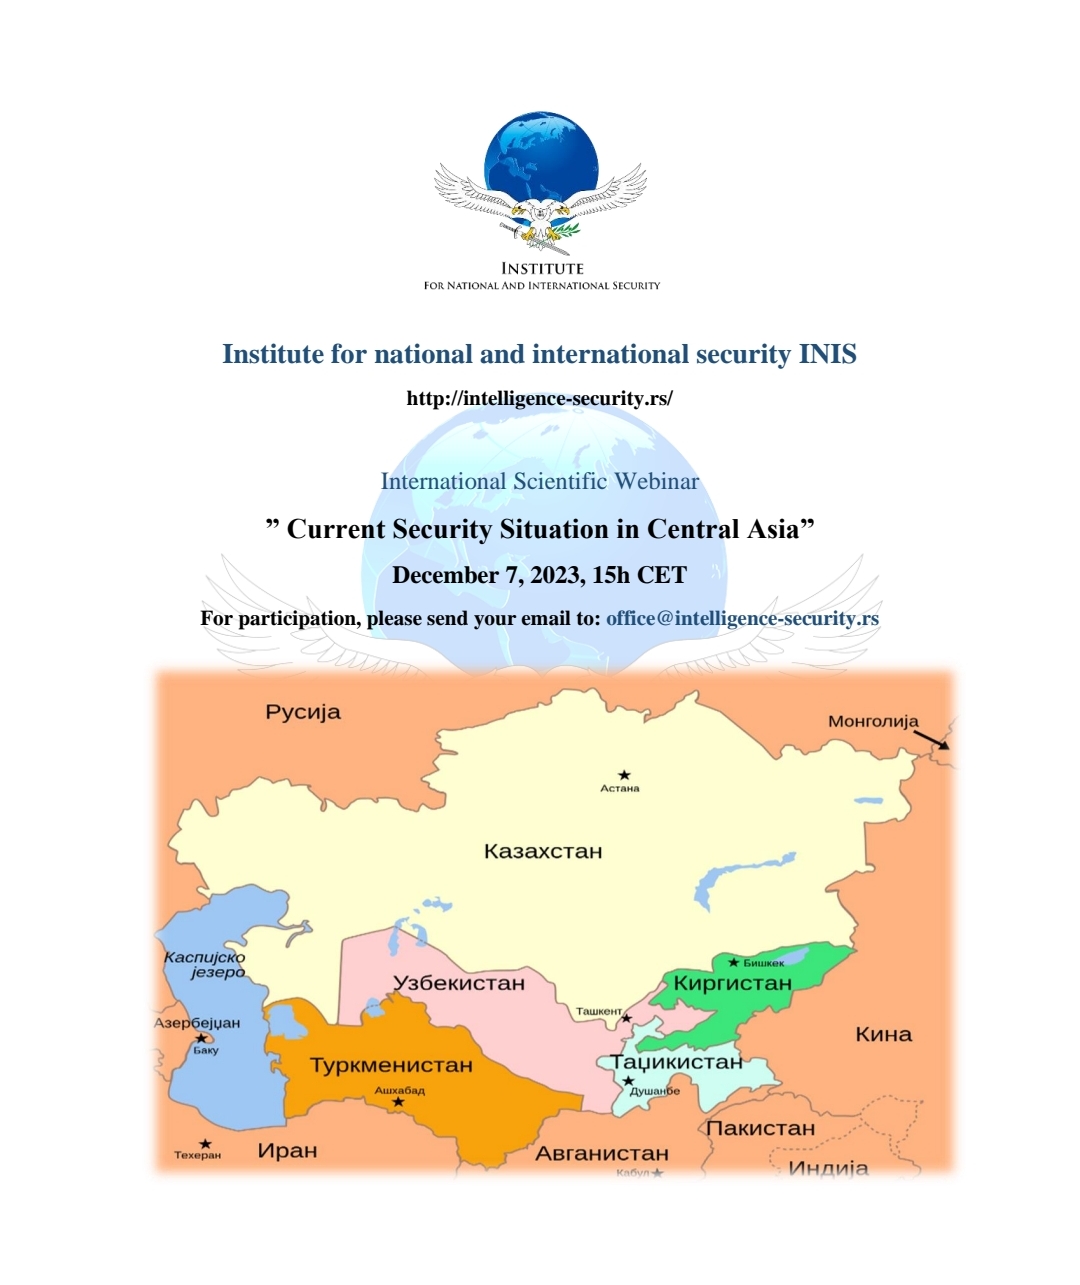 International Scientific Webinar organized by the INIS Institute – ”Current Security Situation in Central Asia”